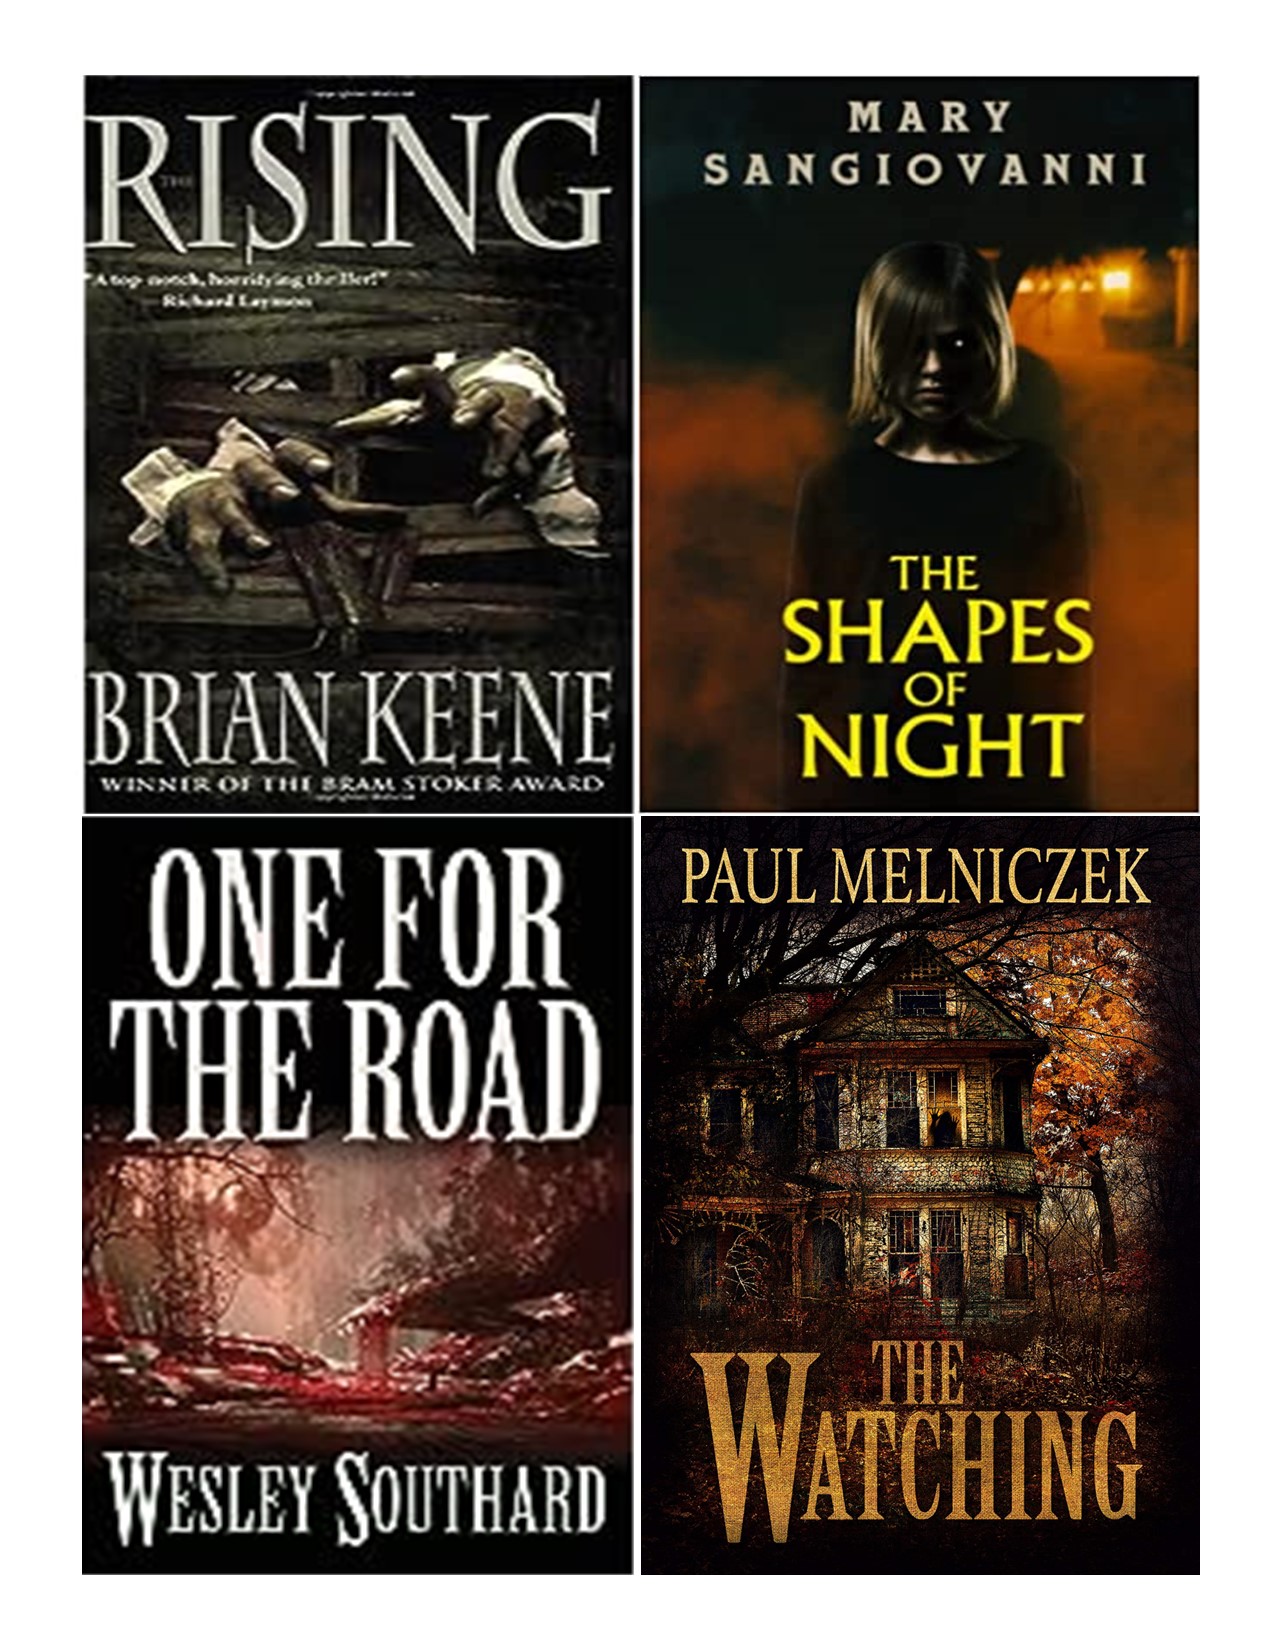 Book covers from the authors.